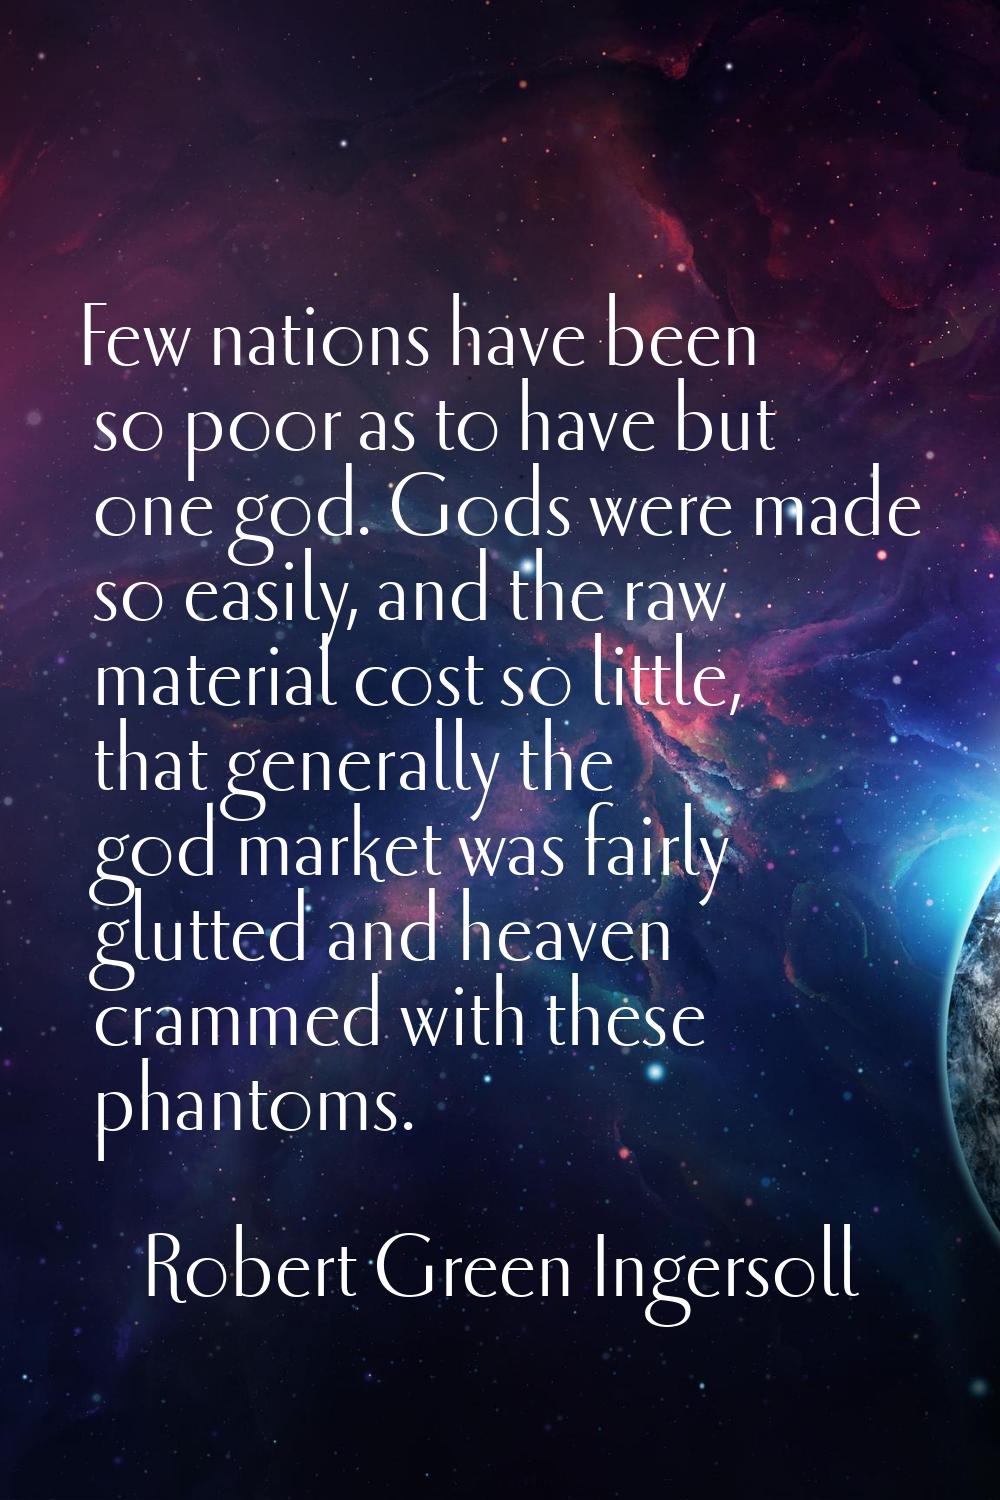 Few nations have been so poor as to have but one god. Gods were made so easily, and the raw materia